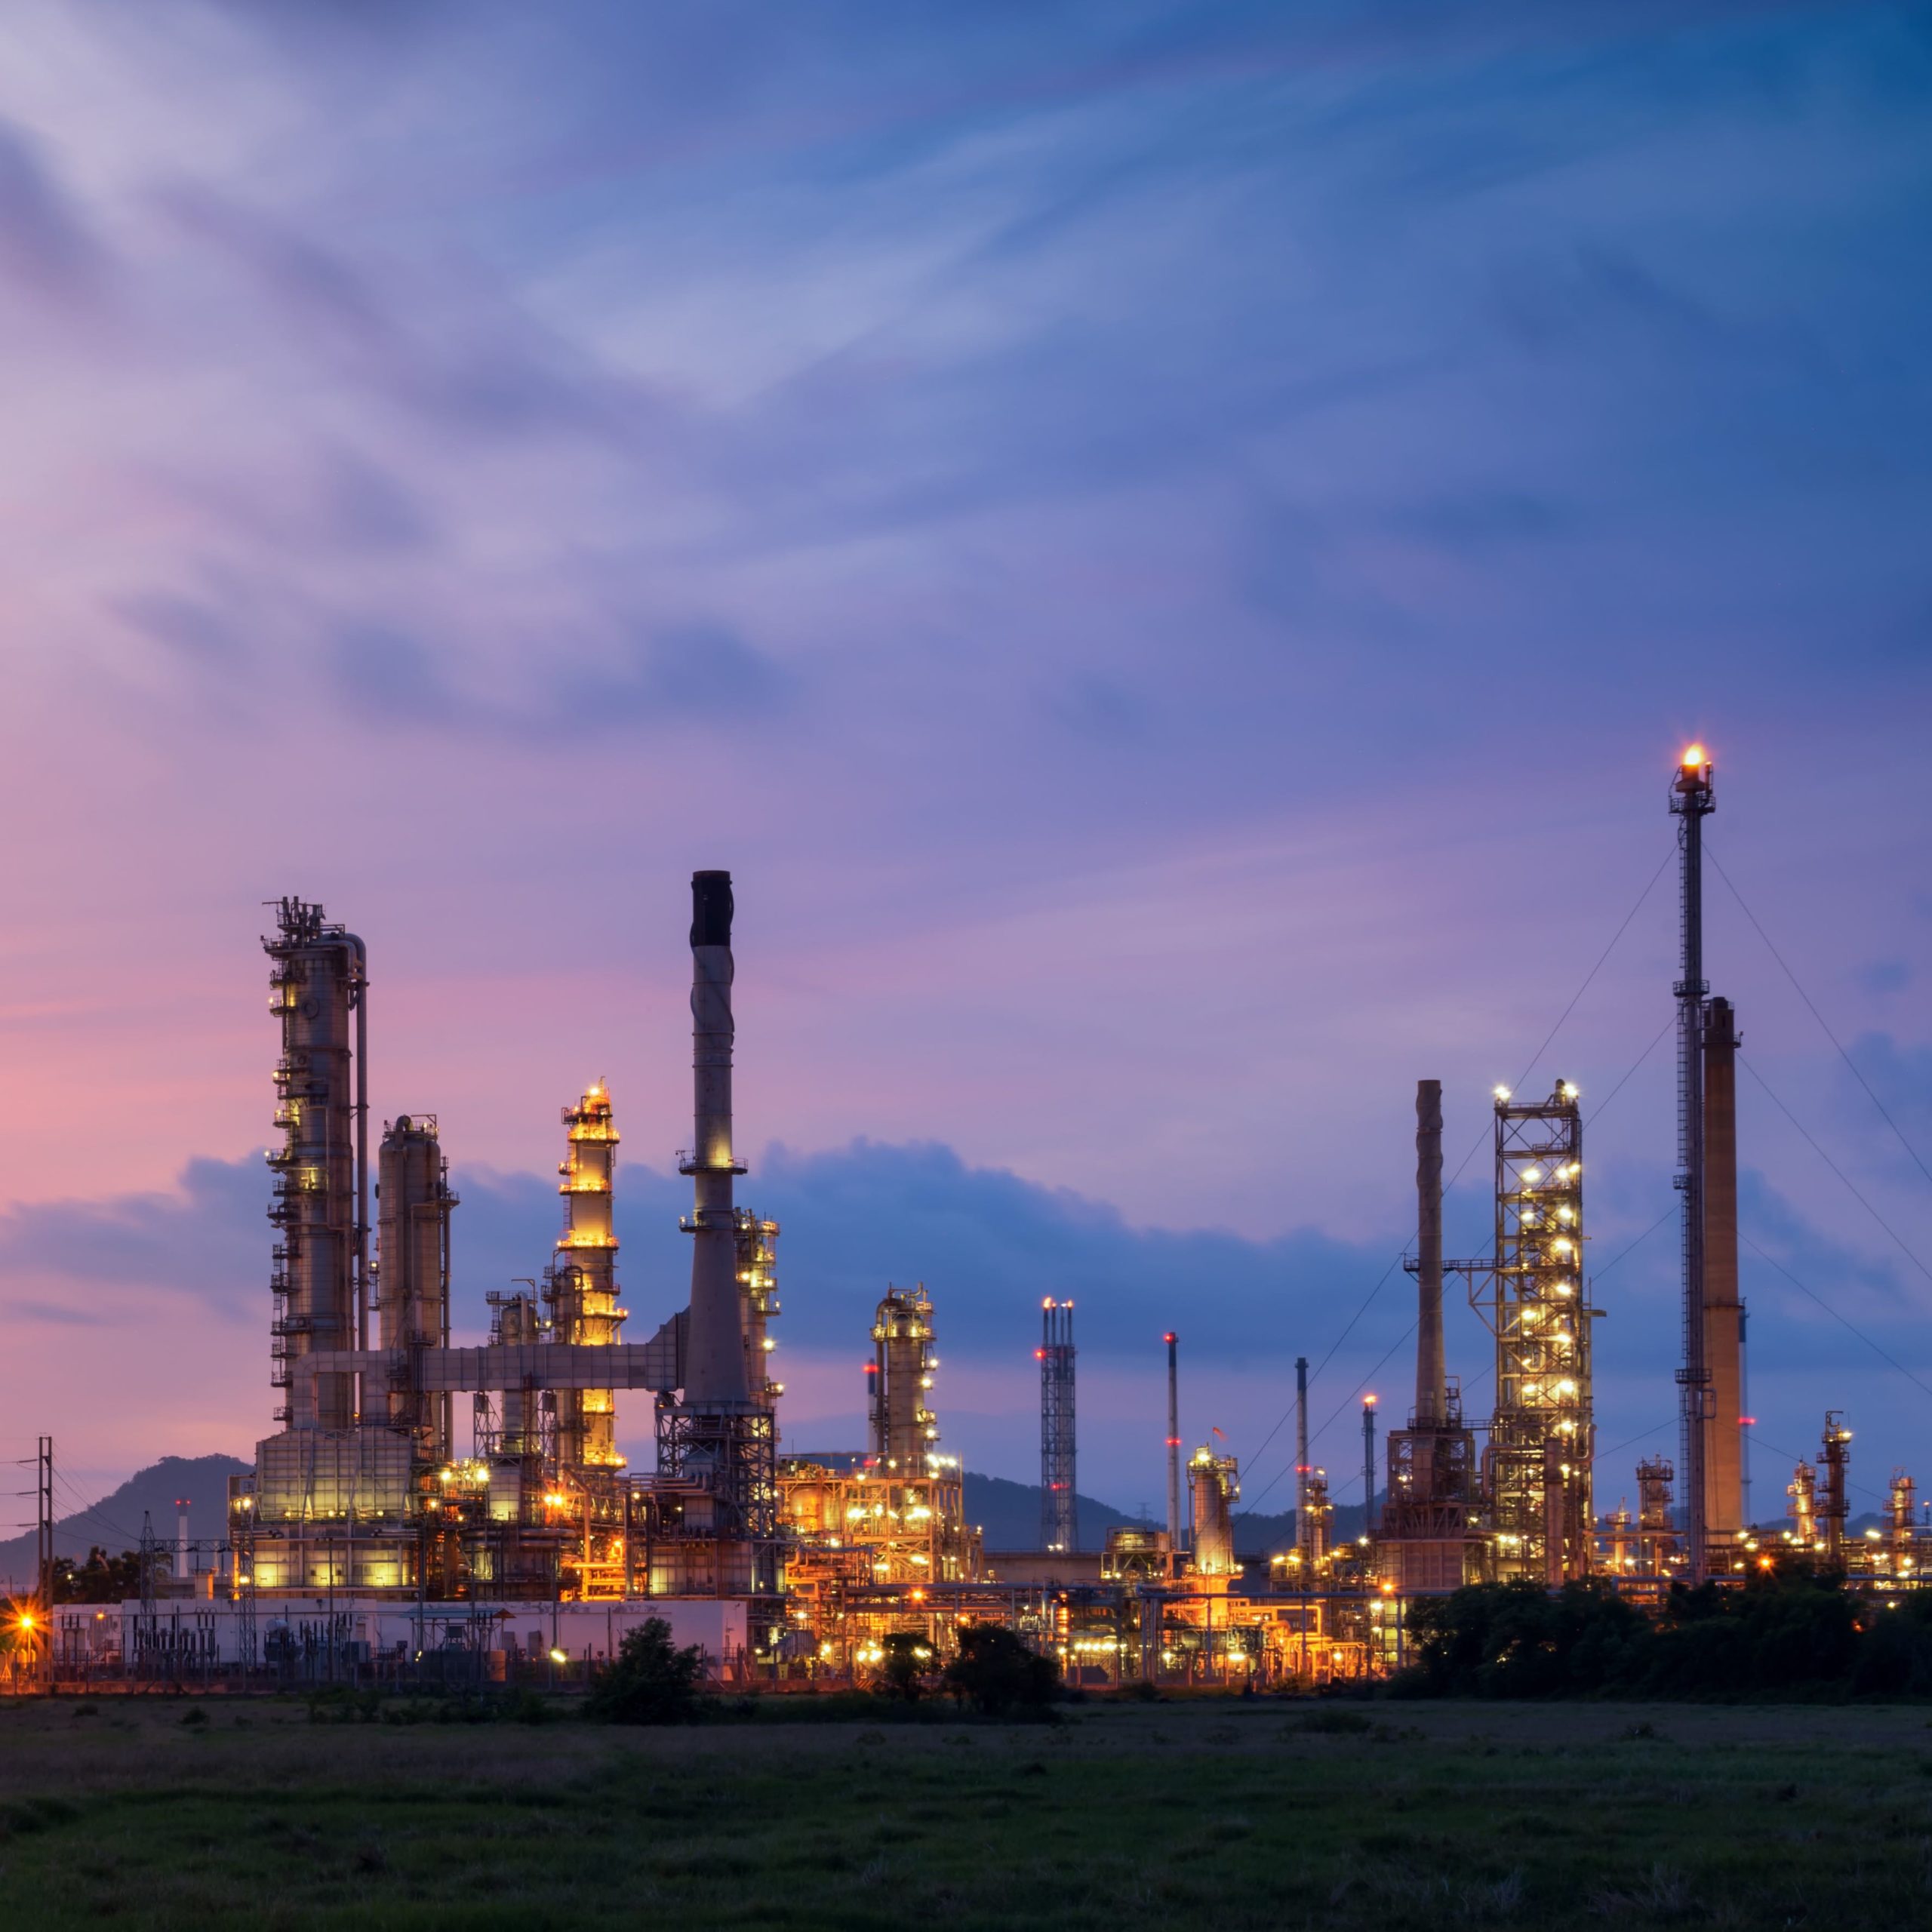 Refinery at Dusk